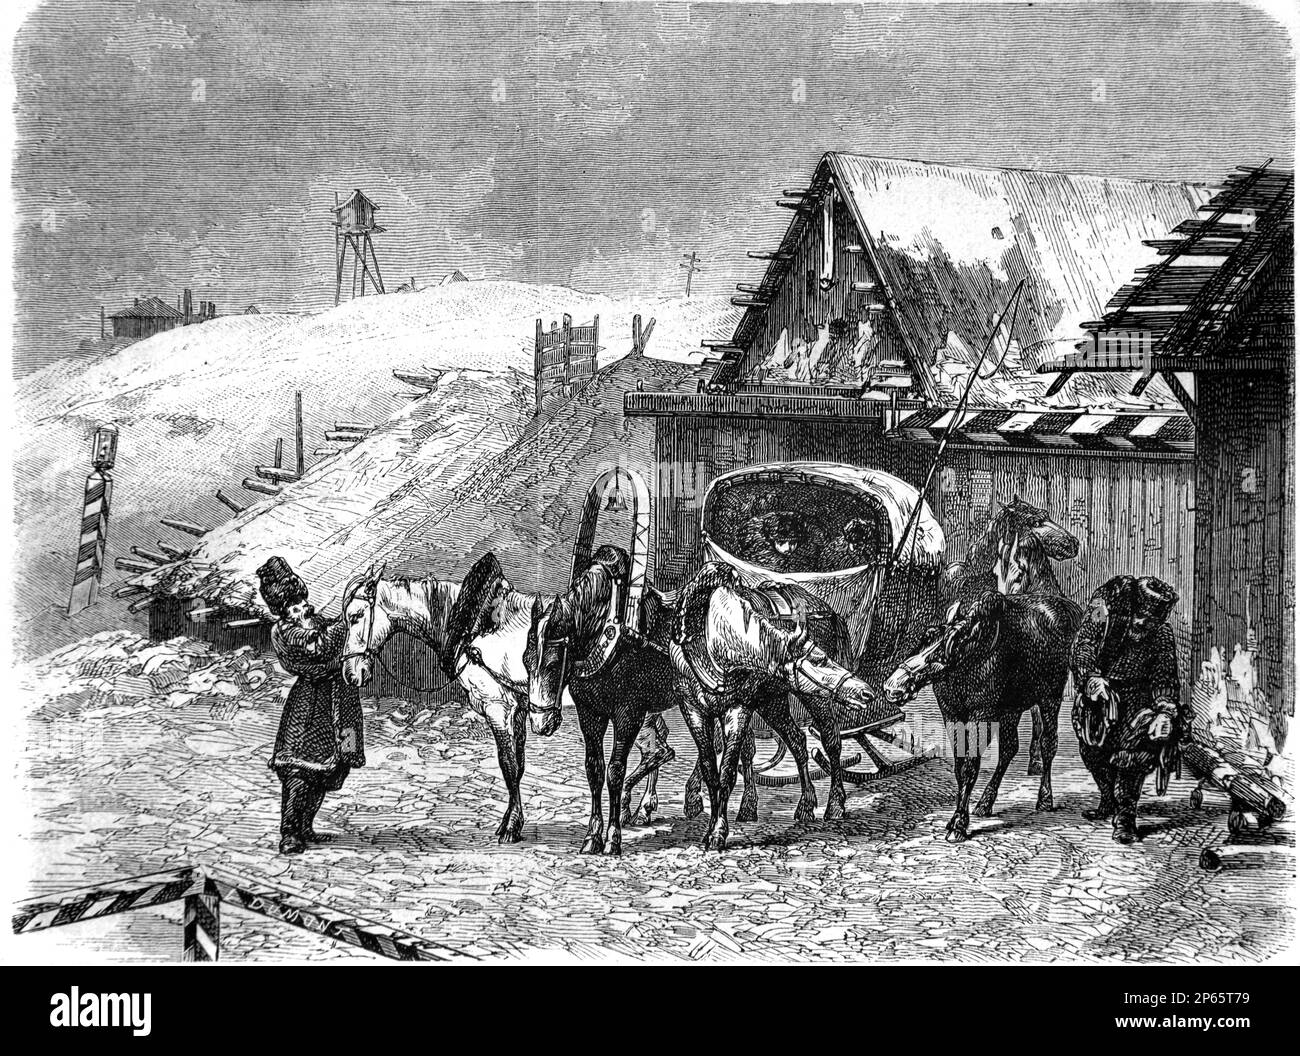 Sleigh Stagecoach Halts at a Staging Post, aka Stage Station, Relay Station, Posting Station, or Stage Stop, Siberia, Russia. Vintage Engraving or Illustration 1862 Relais Russe Siberia 1862 Stock Photo